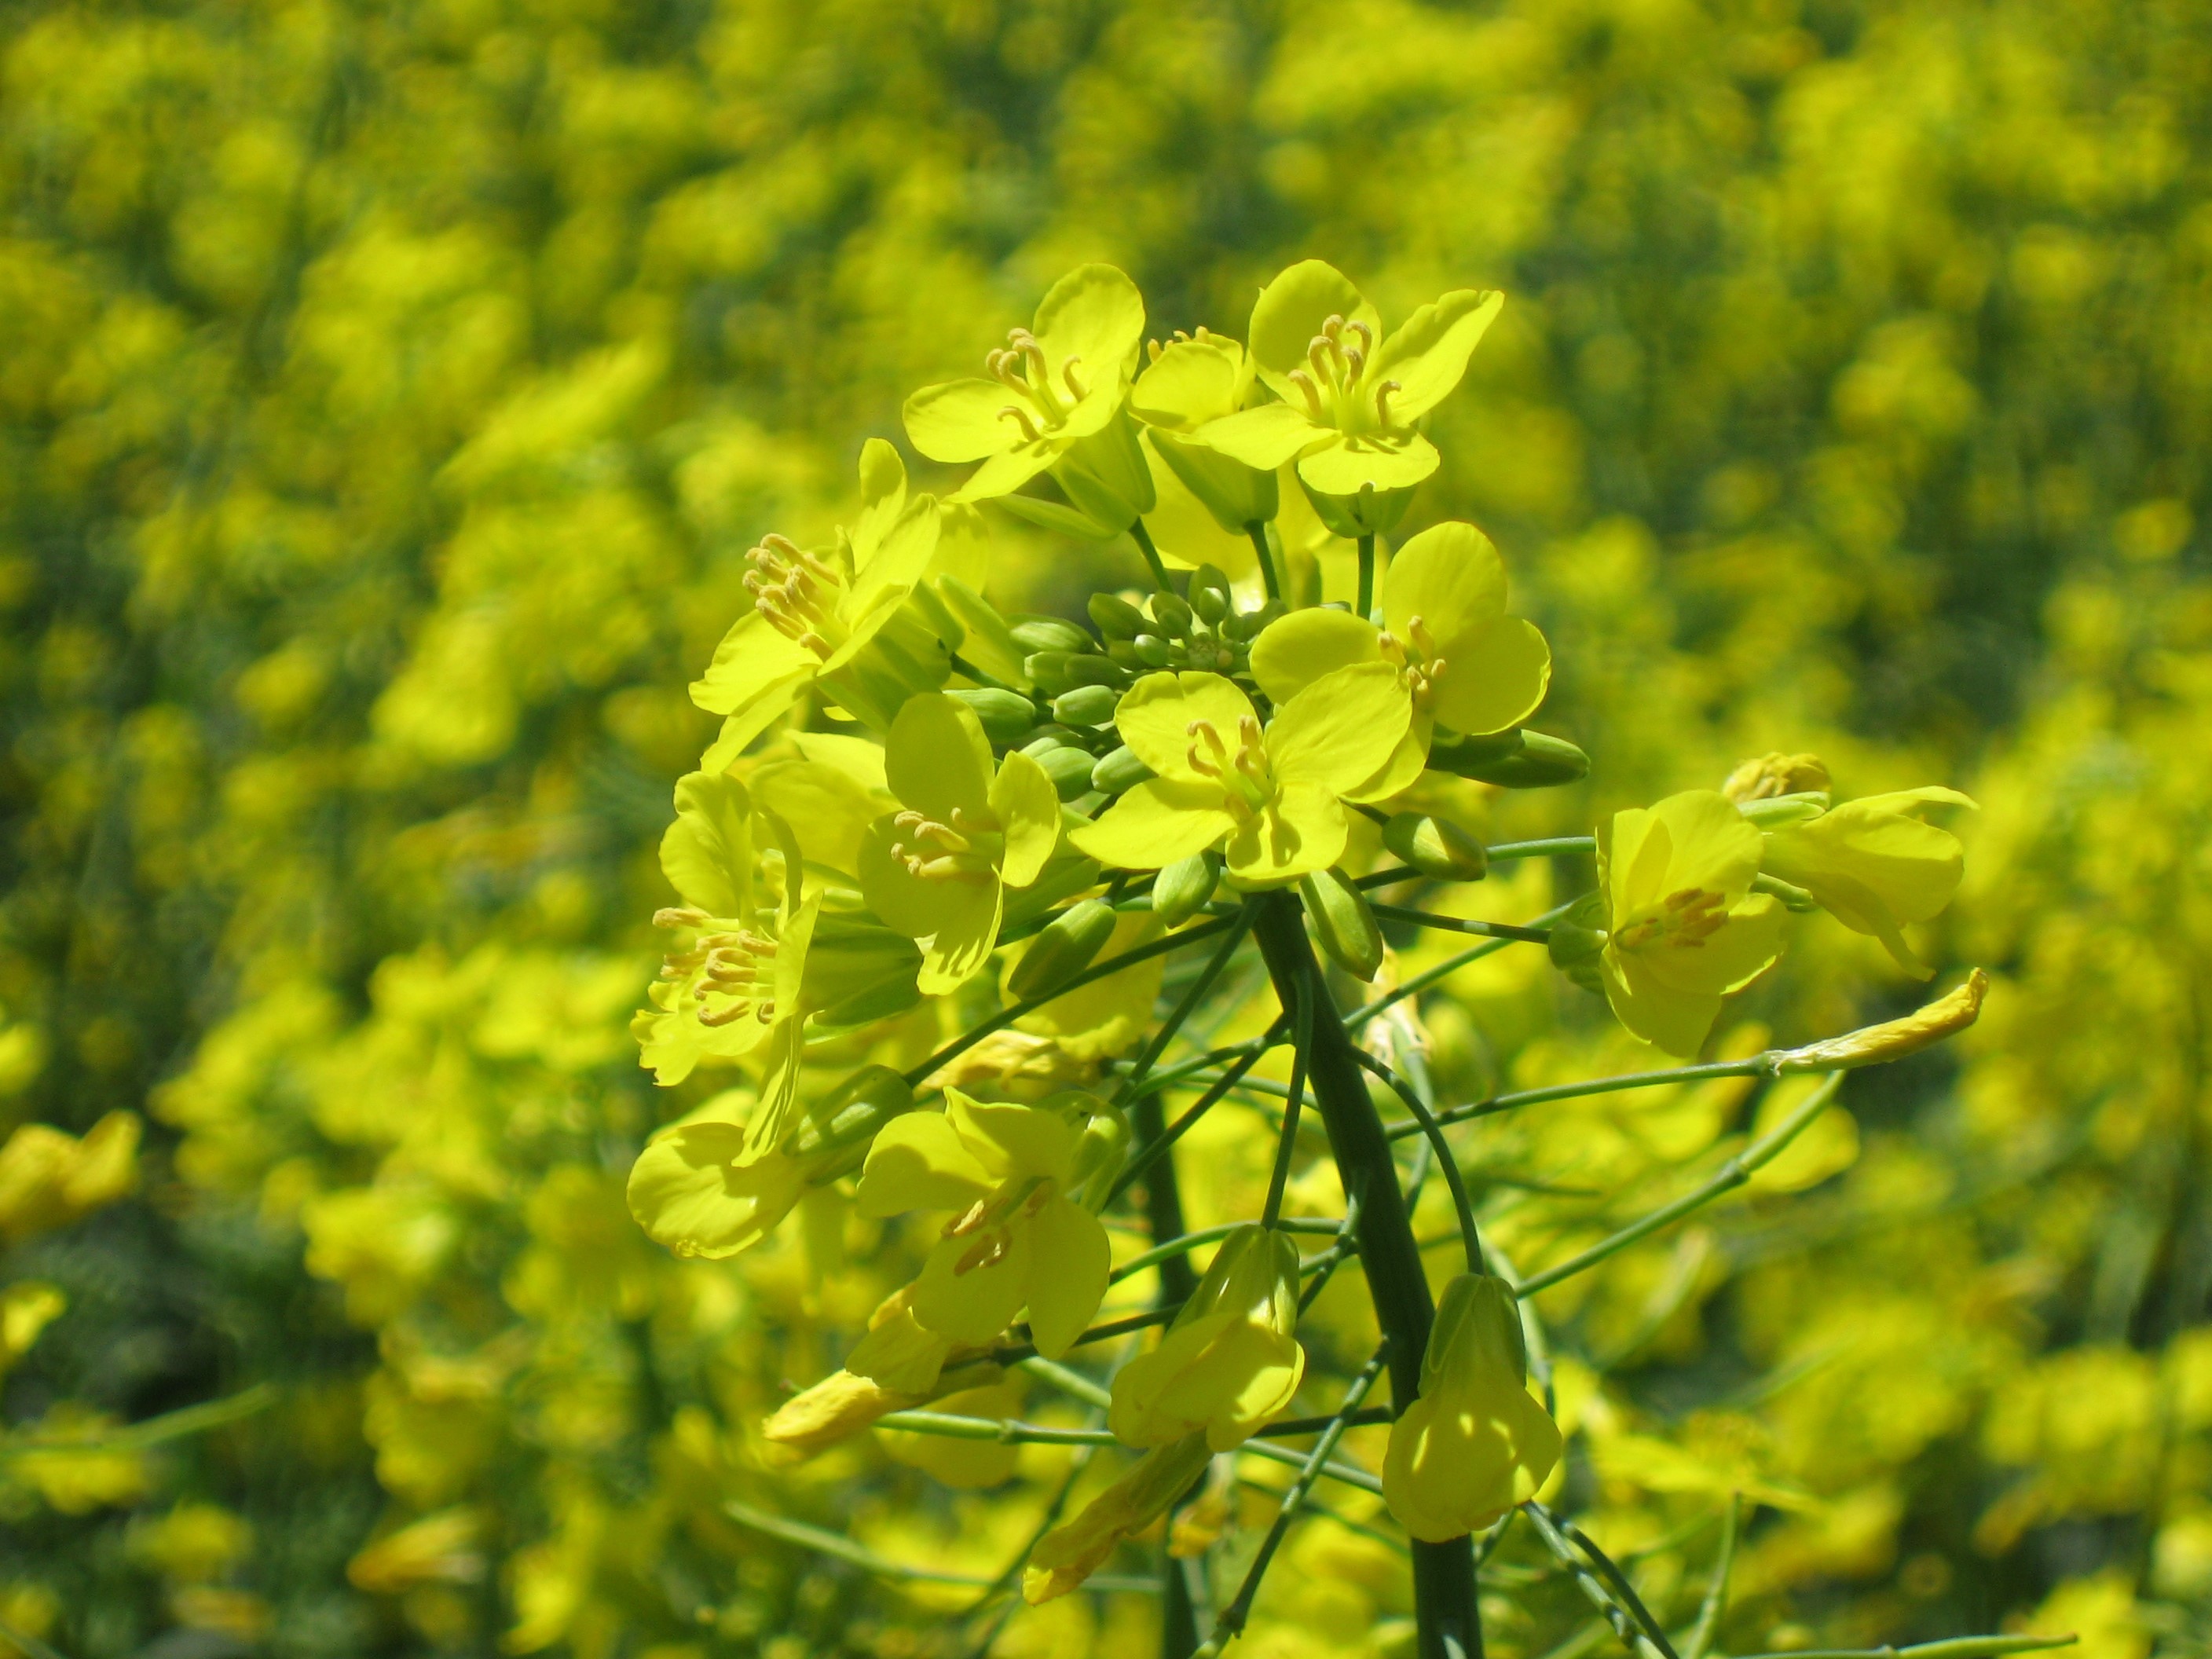 2011 Canola Crop Looking Good- Despite Dry Conditions in Many Locales